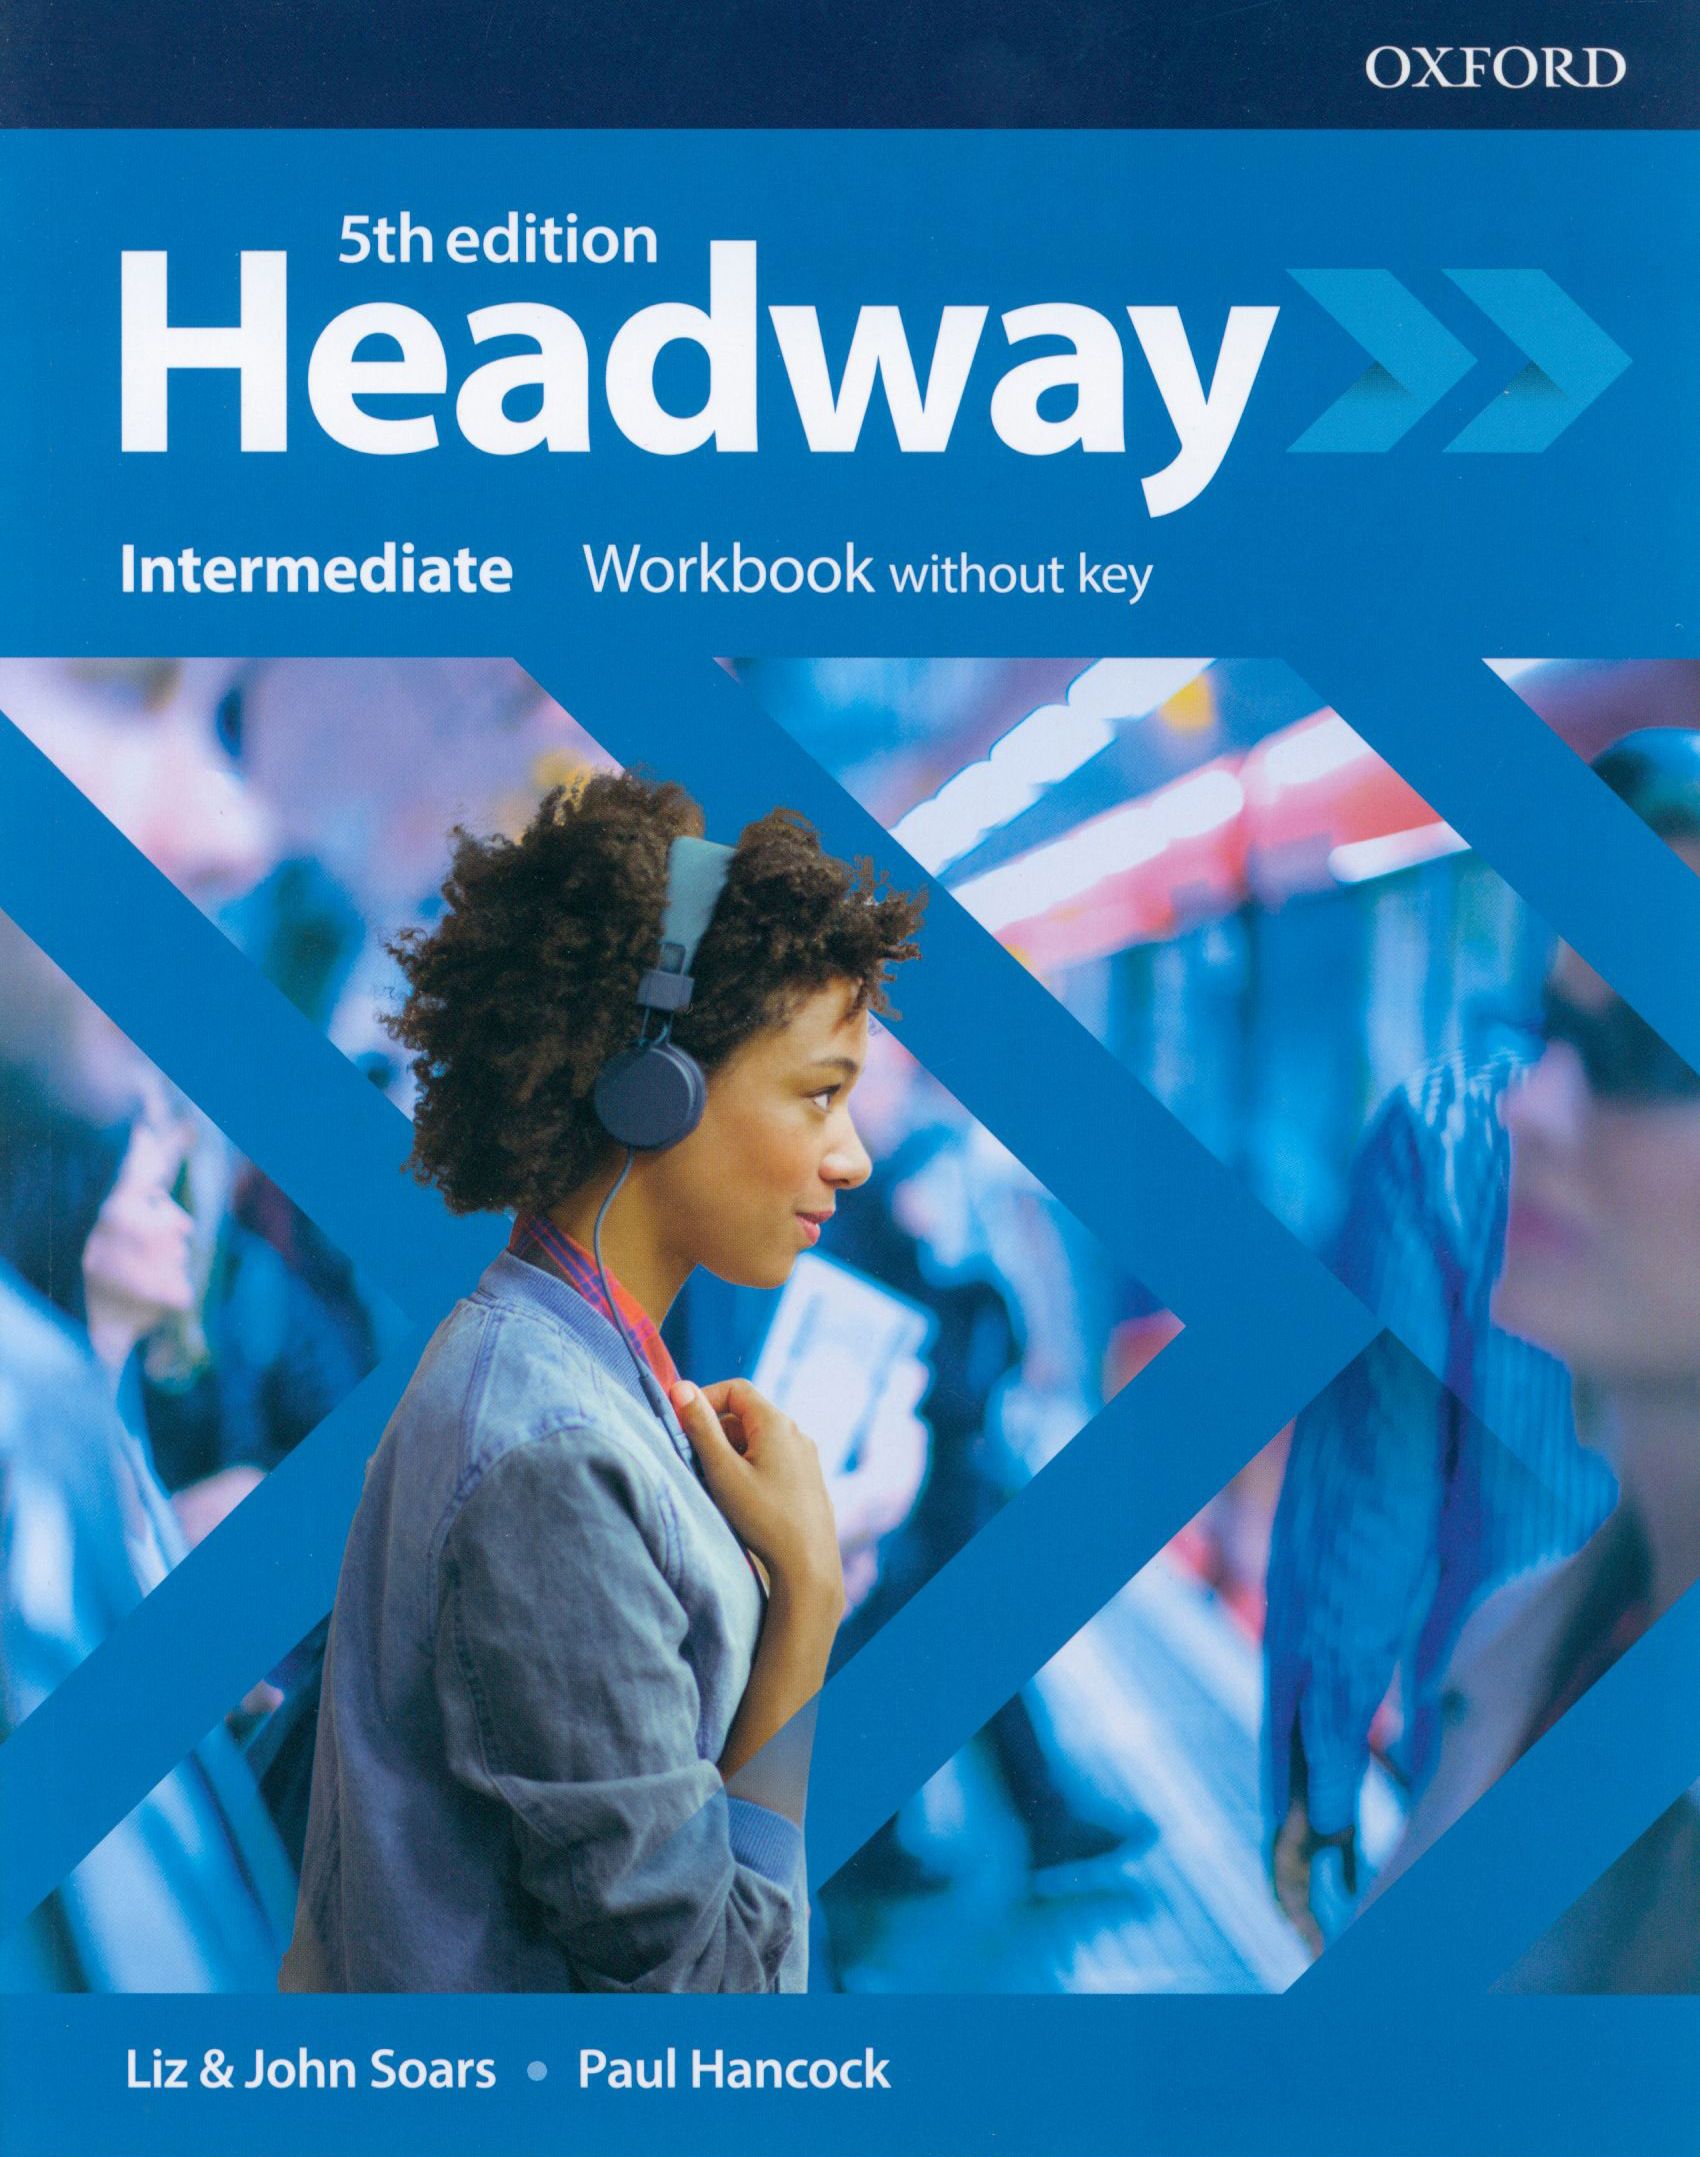 Headway students book 5th edition. Oxford 5th Edition Headway. Headway, 5th Edition - 2019. Headway pre-Intermediate 5th Edition. Headway books 5th Edition.